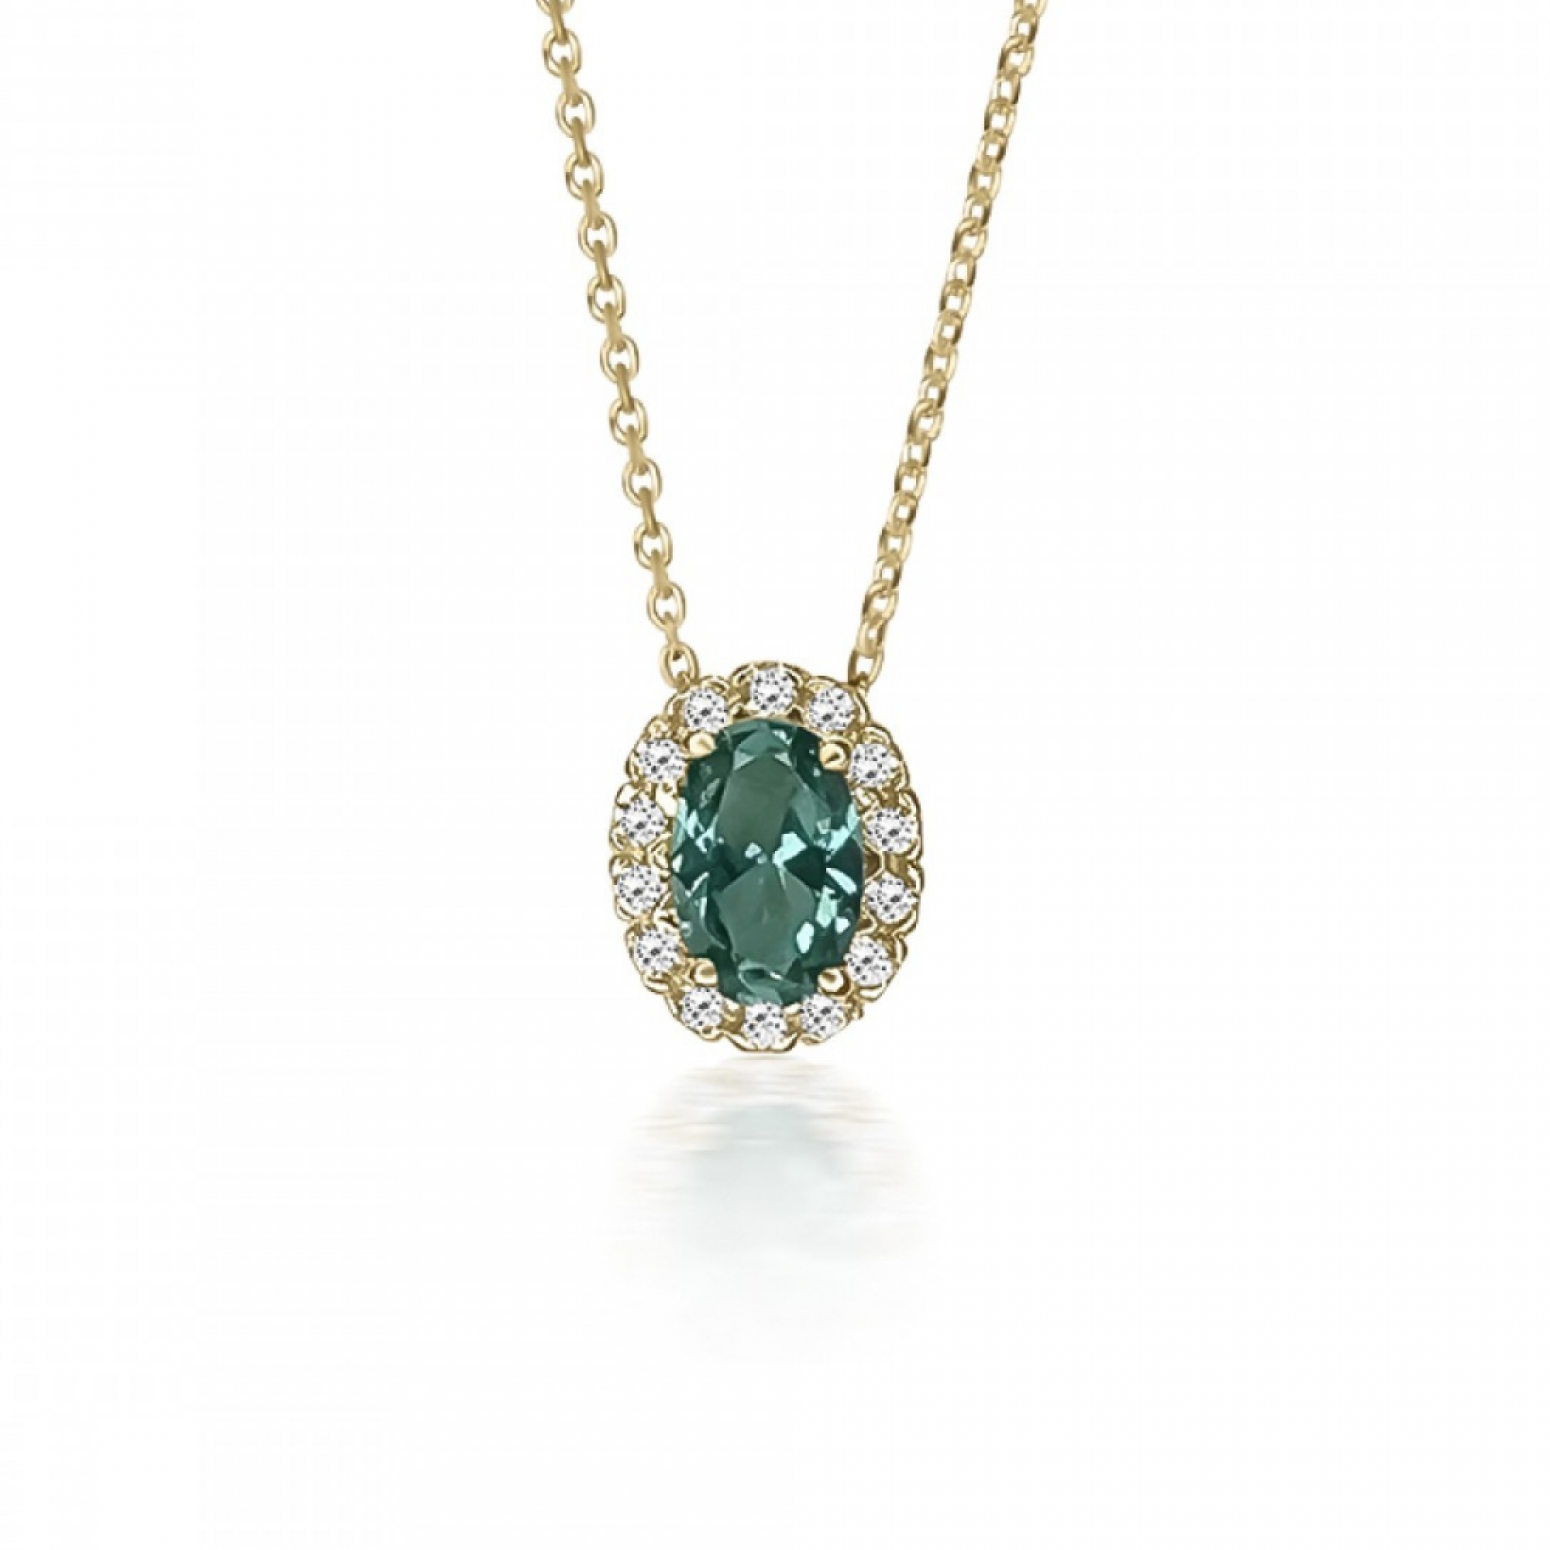 Oval necklace, Κ14 gold with green and white zircon, ko5736 NECKLACES Κοσμηματα - chrilia.gr